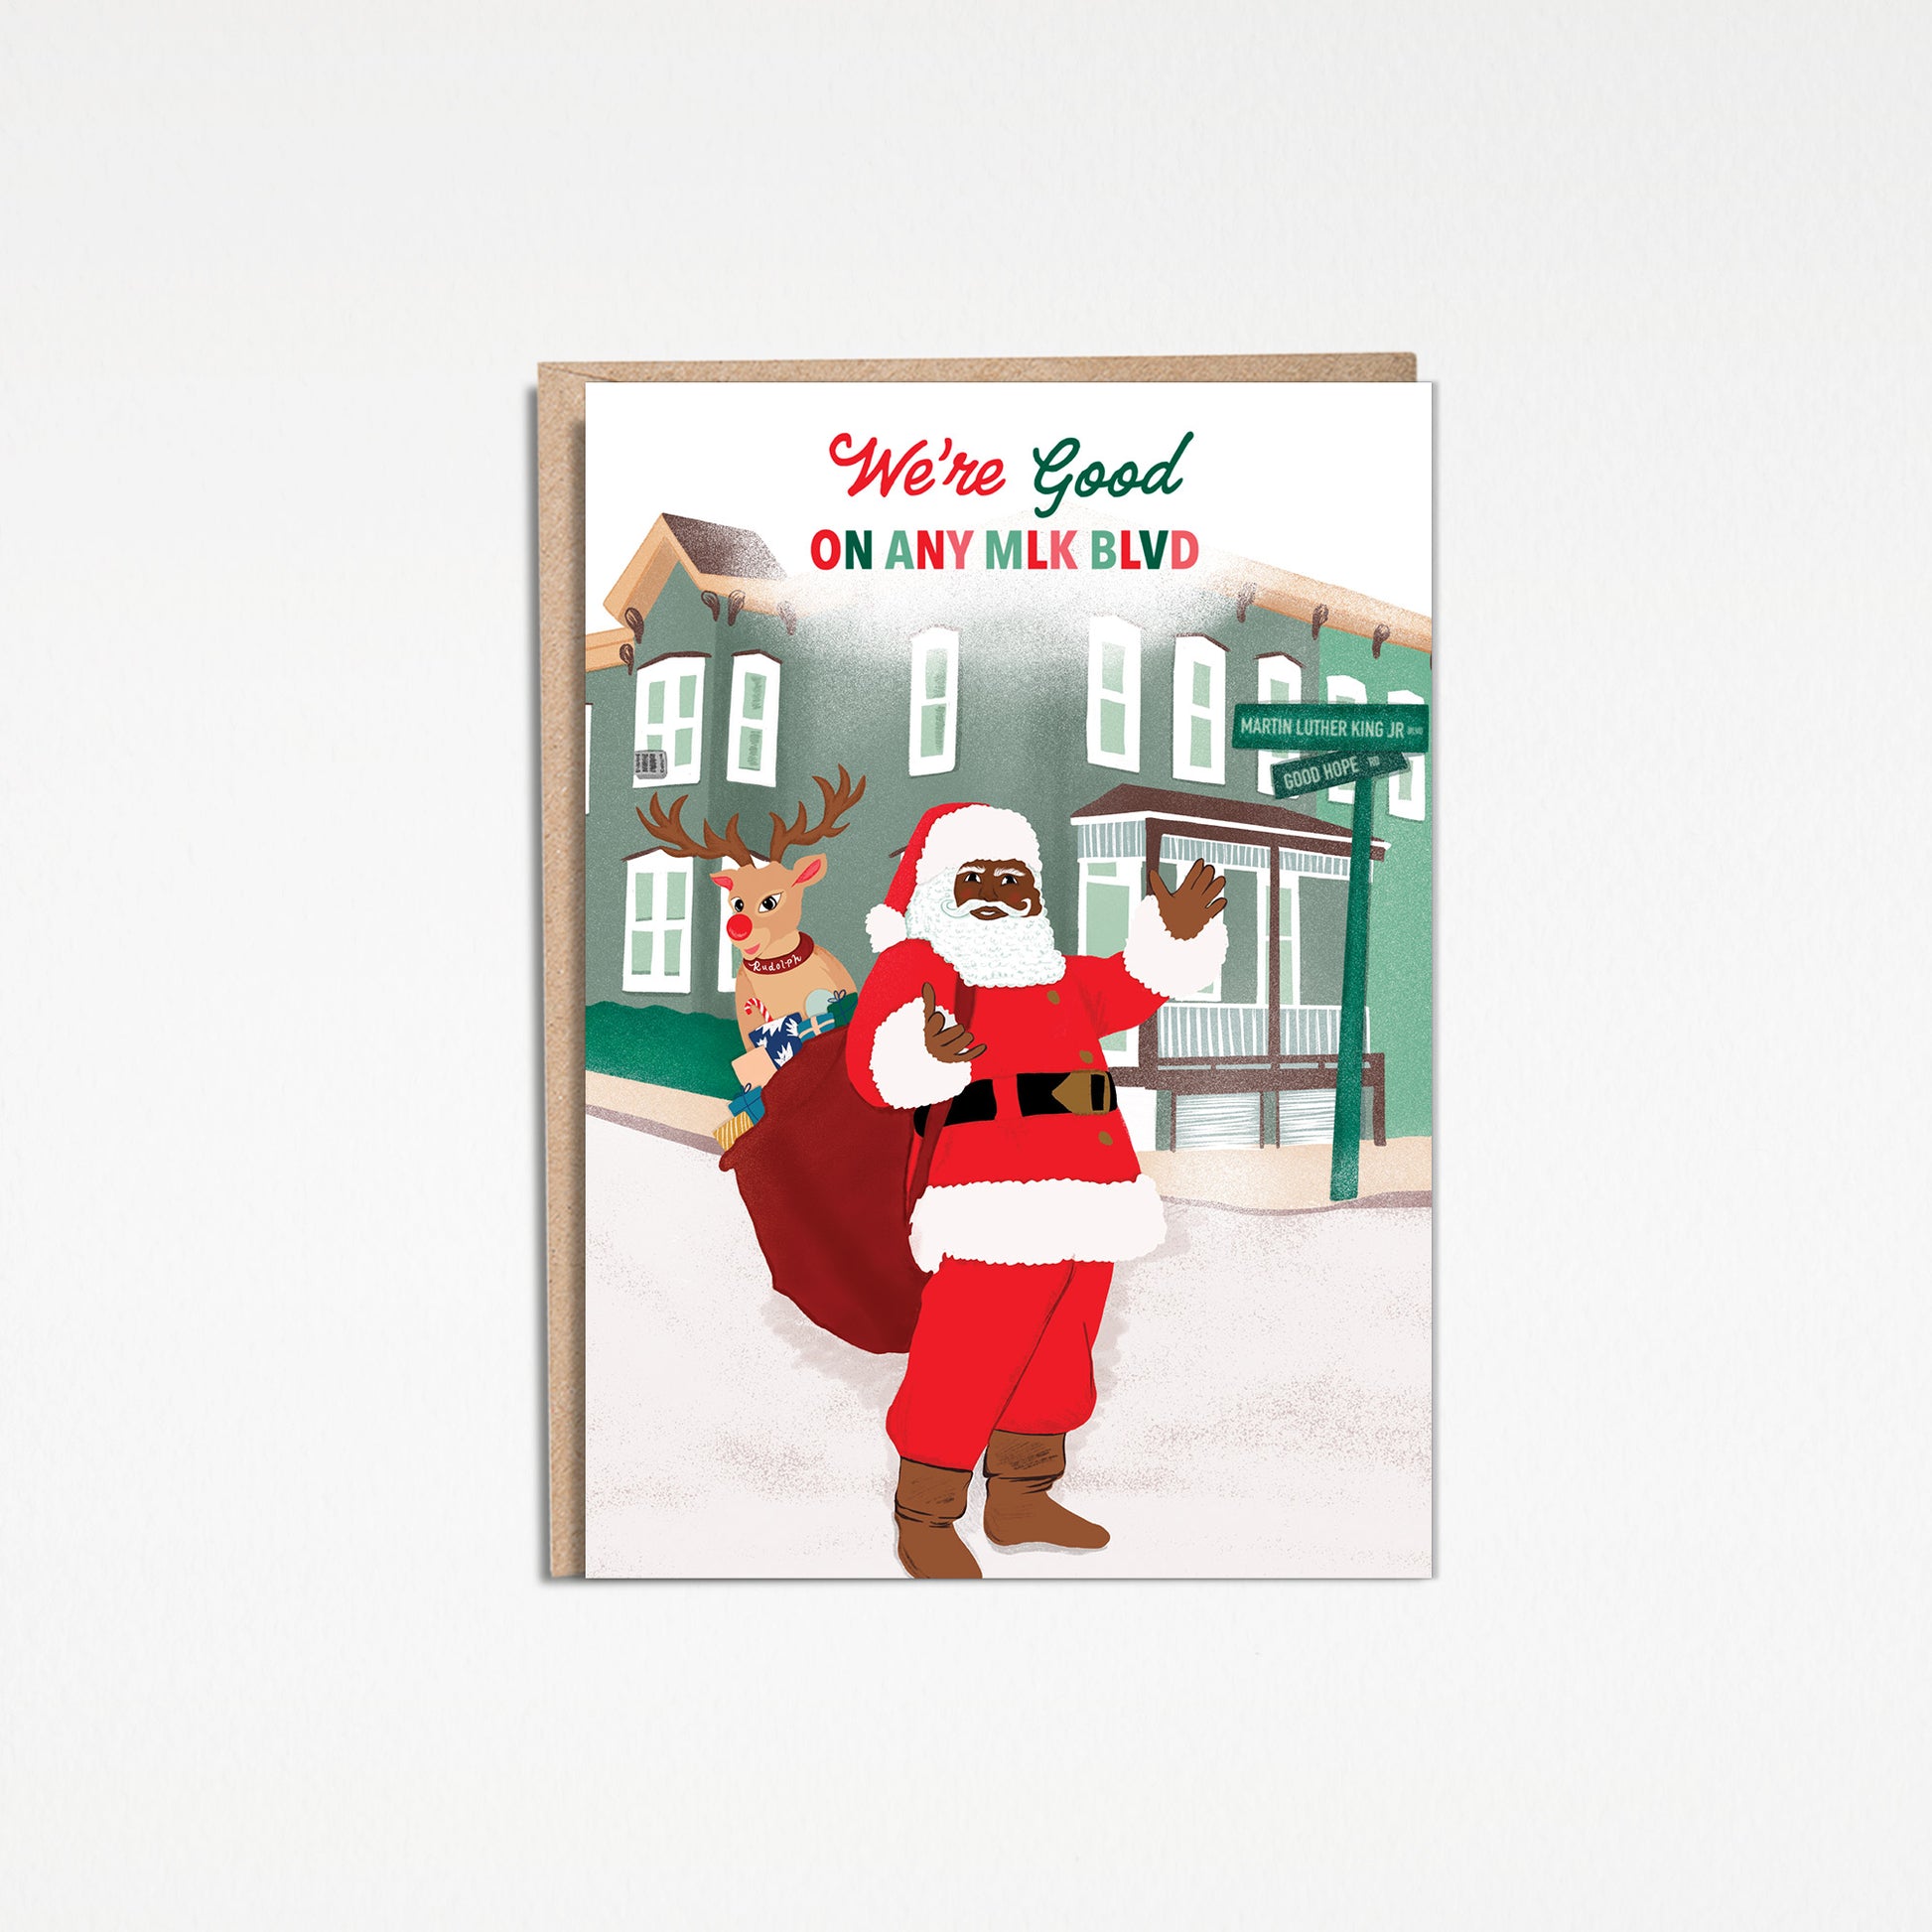 High quality 5x7 inch Christmas greeting card illustration titled Santa’s Hood illustrates Black Santa Claus standing in the street on the corner of Martin Luther King Jr Blvd and Good Hope Road in Washington DC. Santa has a red sack on his shoulder filled with presents and Rudolph the rednosed reindeer behind him. A green colored house sits in the background. The sky has snow falling with the words “We’re Good On Any MLK Blvd” in red and green.